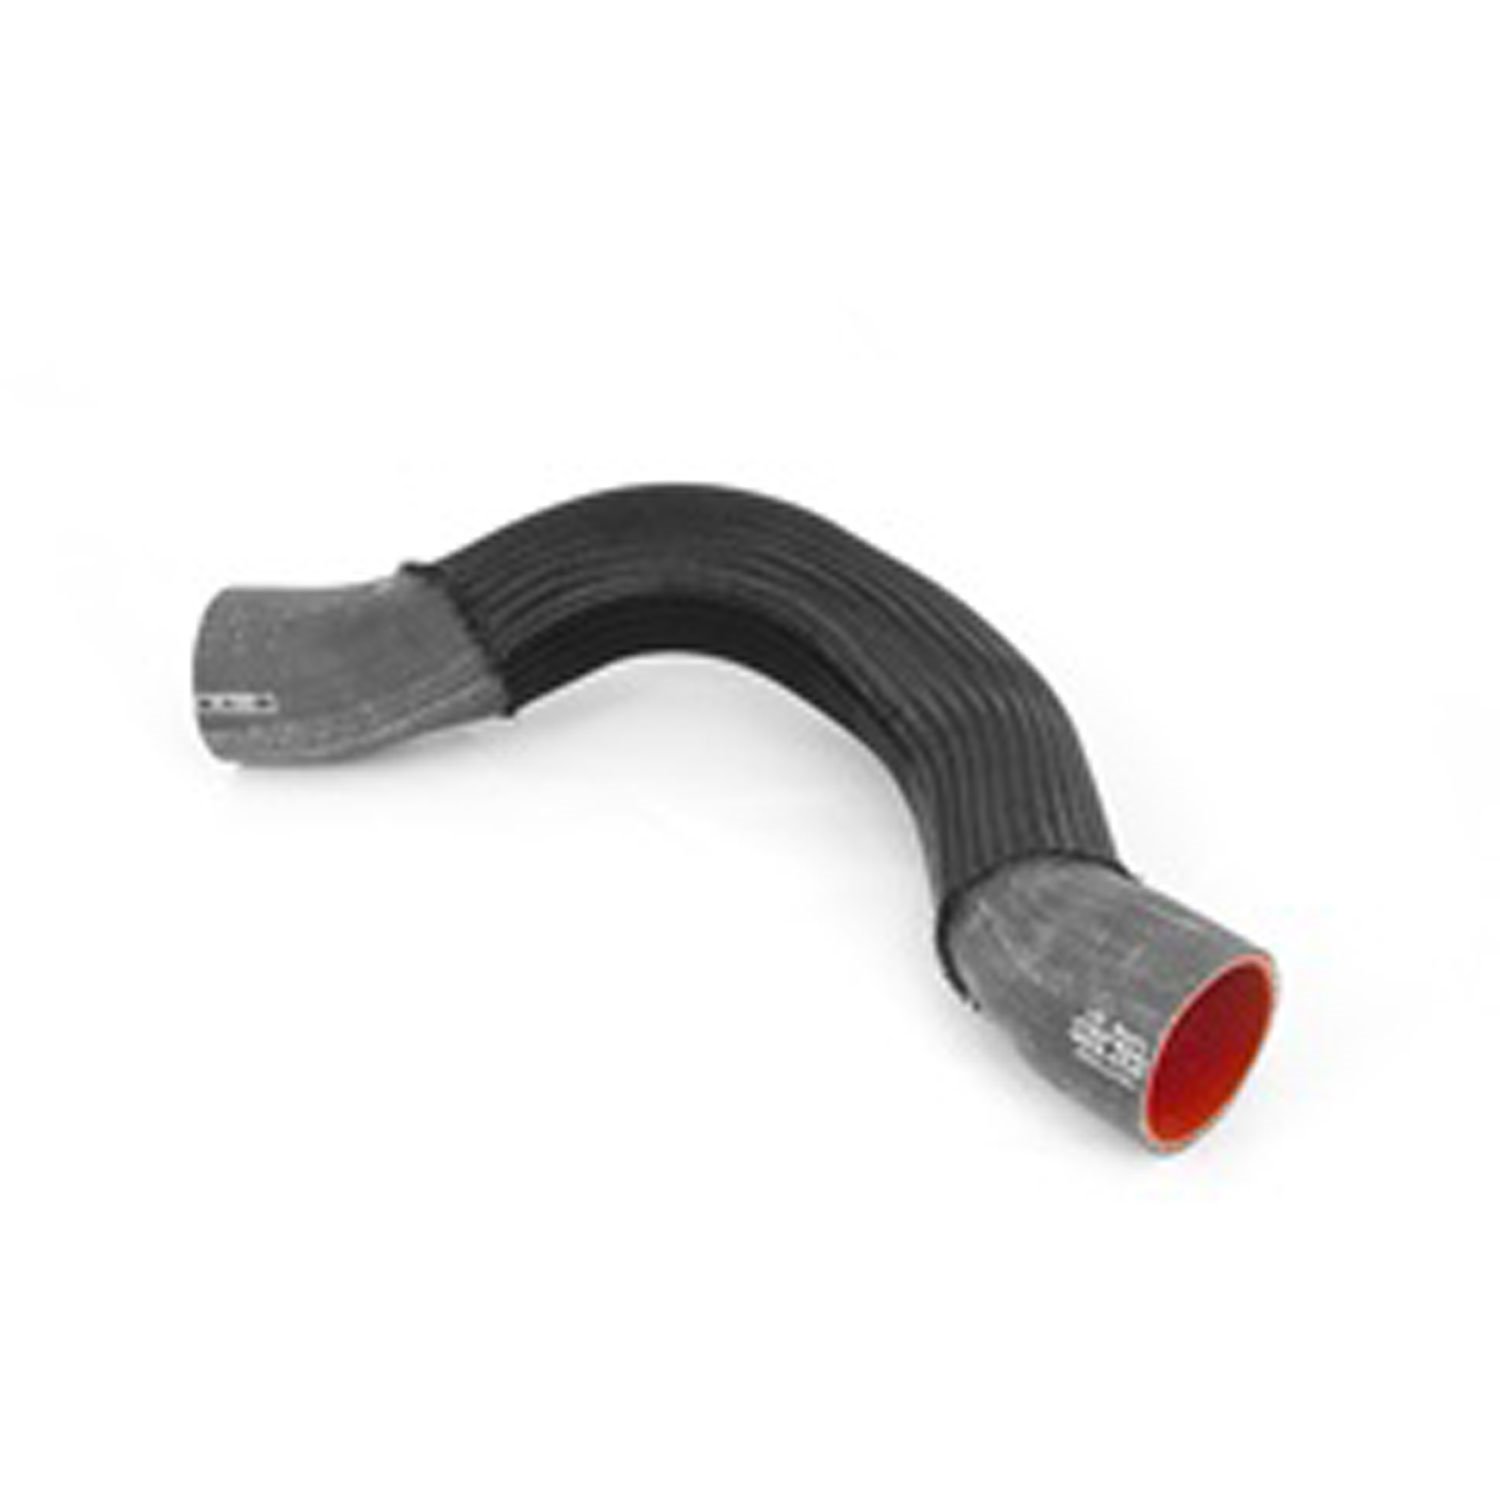 Stock replacement intercooler air charge outlet hose from Omix-ADA, Fits 05-06 Jeep Liberty KJ w